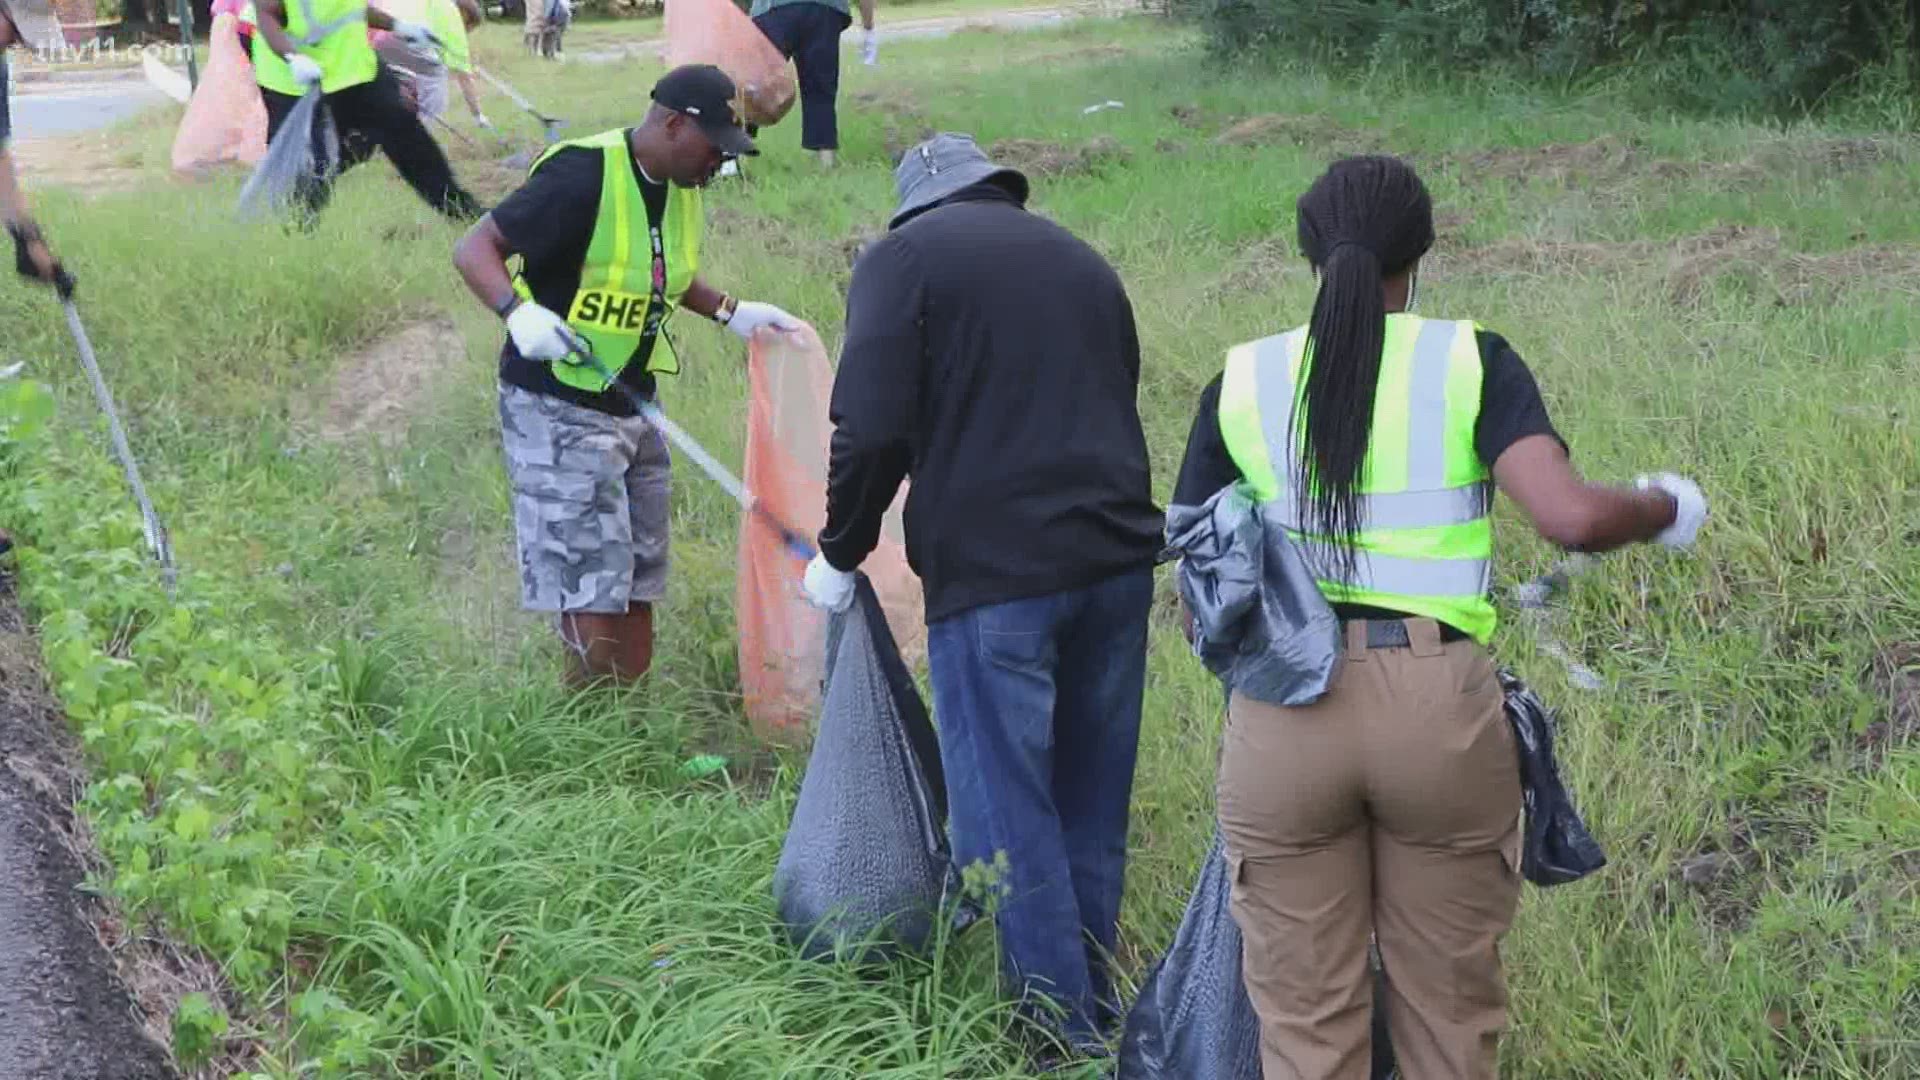 Citizens in Pine Bluff used their Saturday morning to better their community. City leaders, university students, and residents came together for a city cleanup.